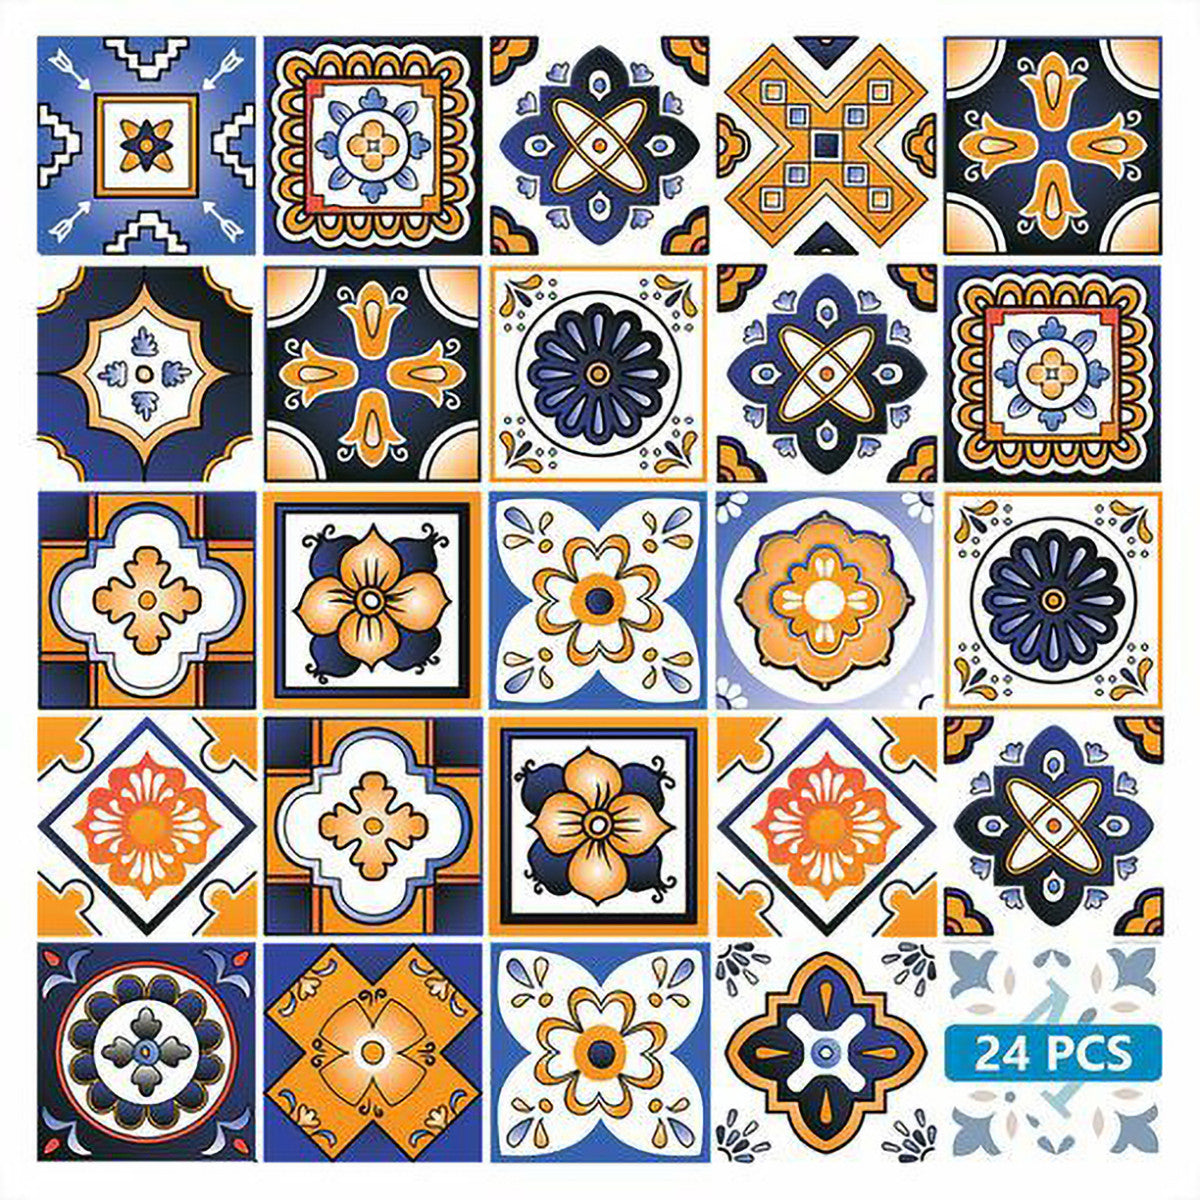 8" x 8" Shades of Blue and Yellow Mosaic Peel and Stick Removable Tiles